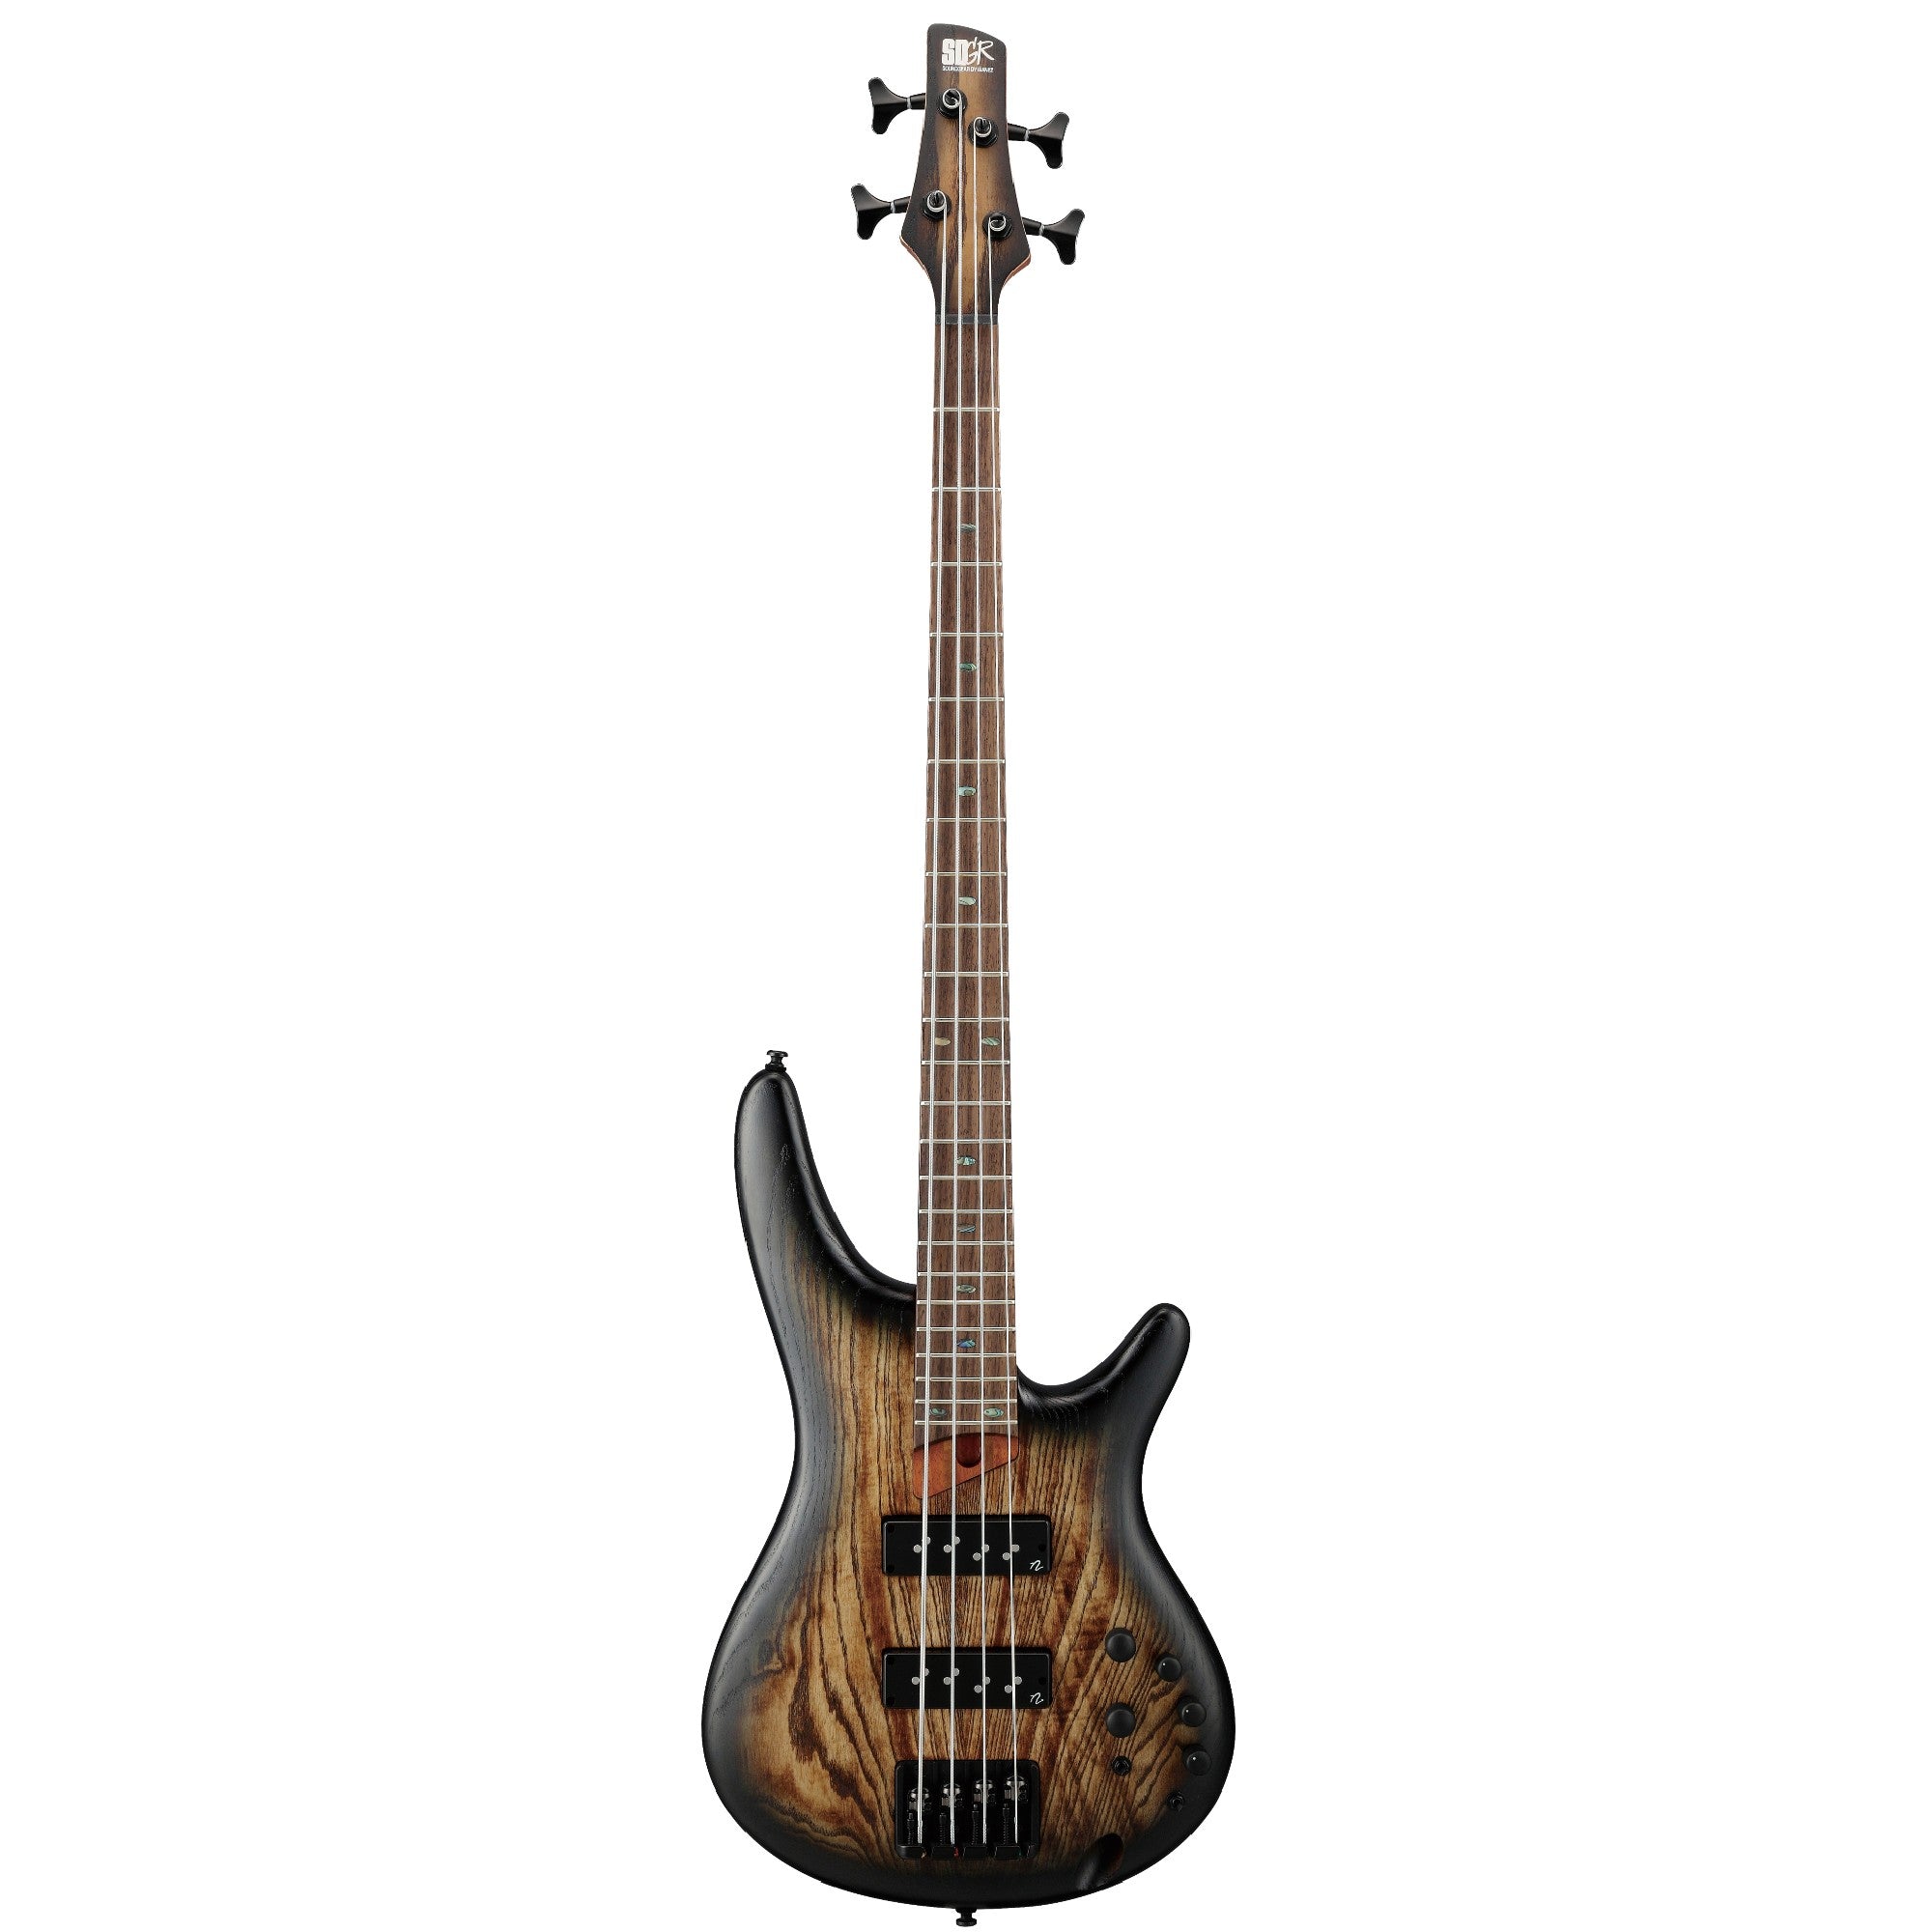 Ibanez SR600EAST 4-String Bass Guitar - Antique Brown Stained Burst Front